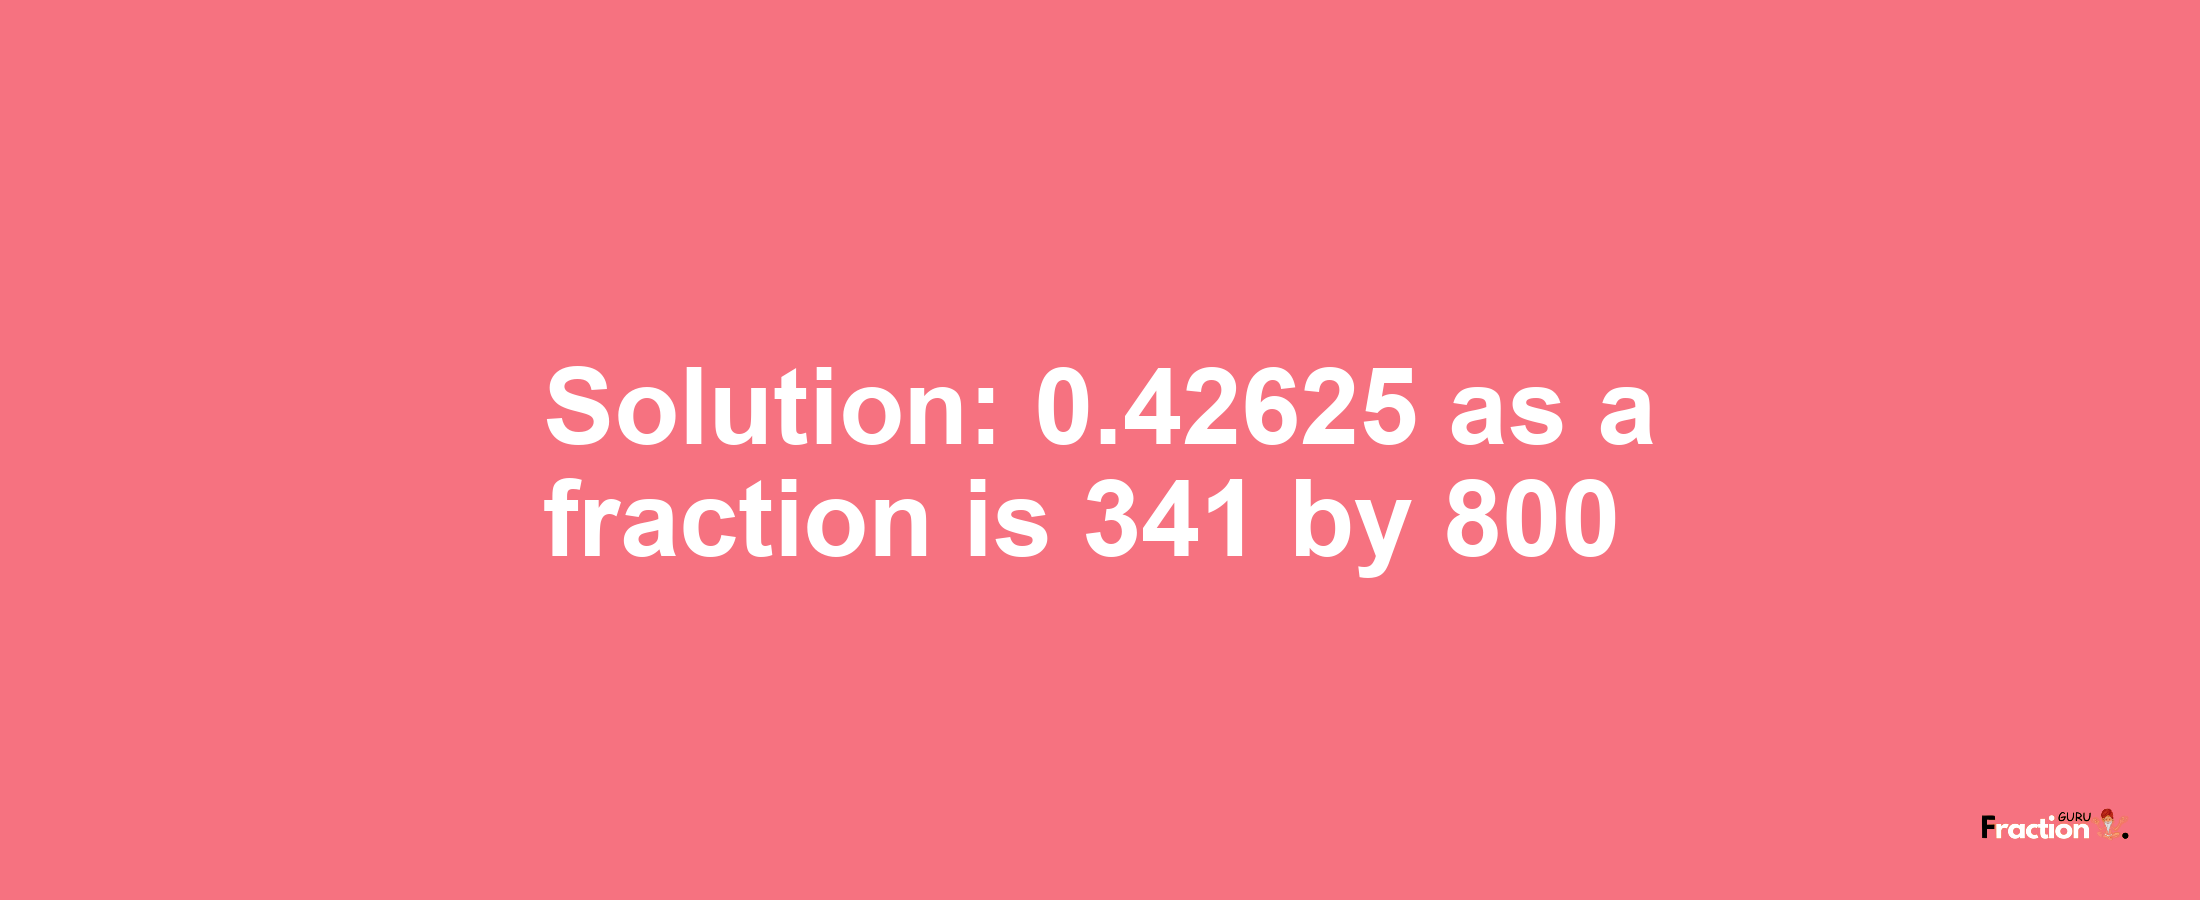 Solution:0.42625 as a fraction is 341/800